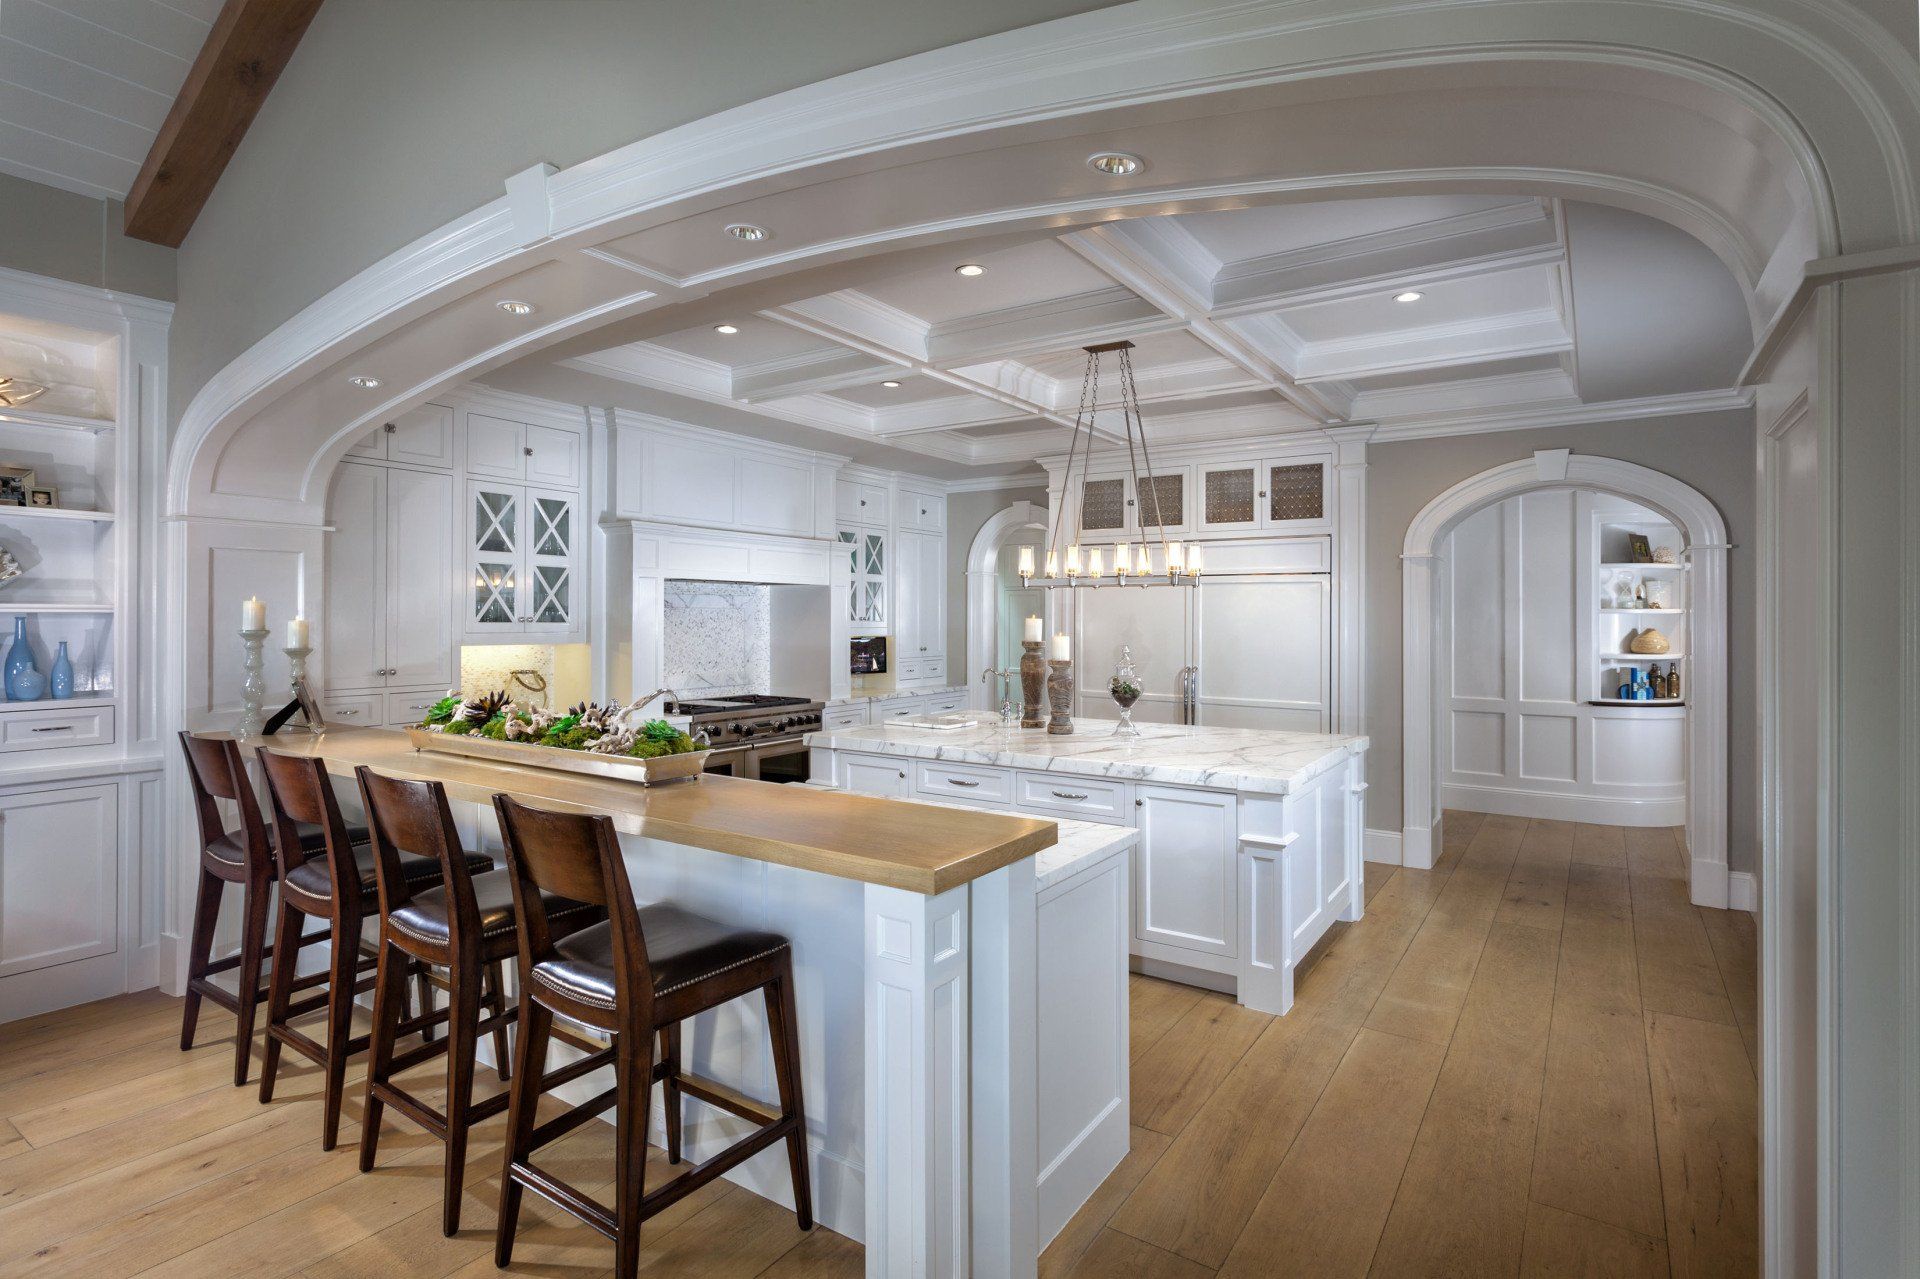 Kitchen of a Newport Beach house designed by Oatman Architects